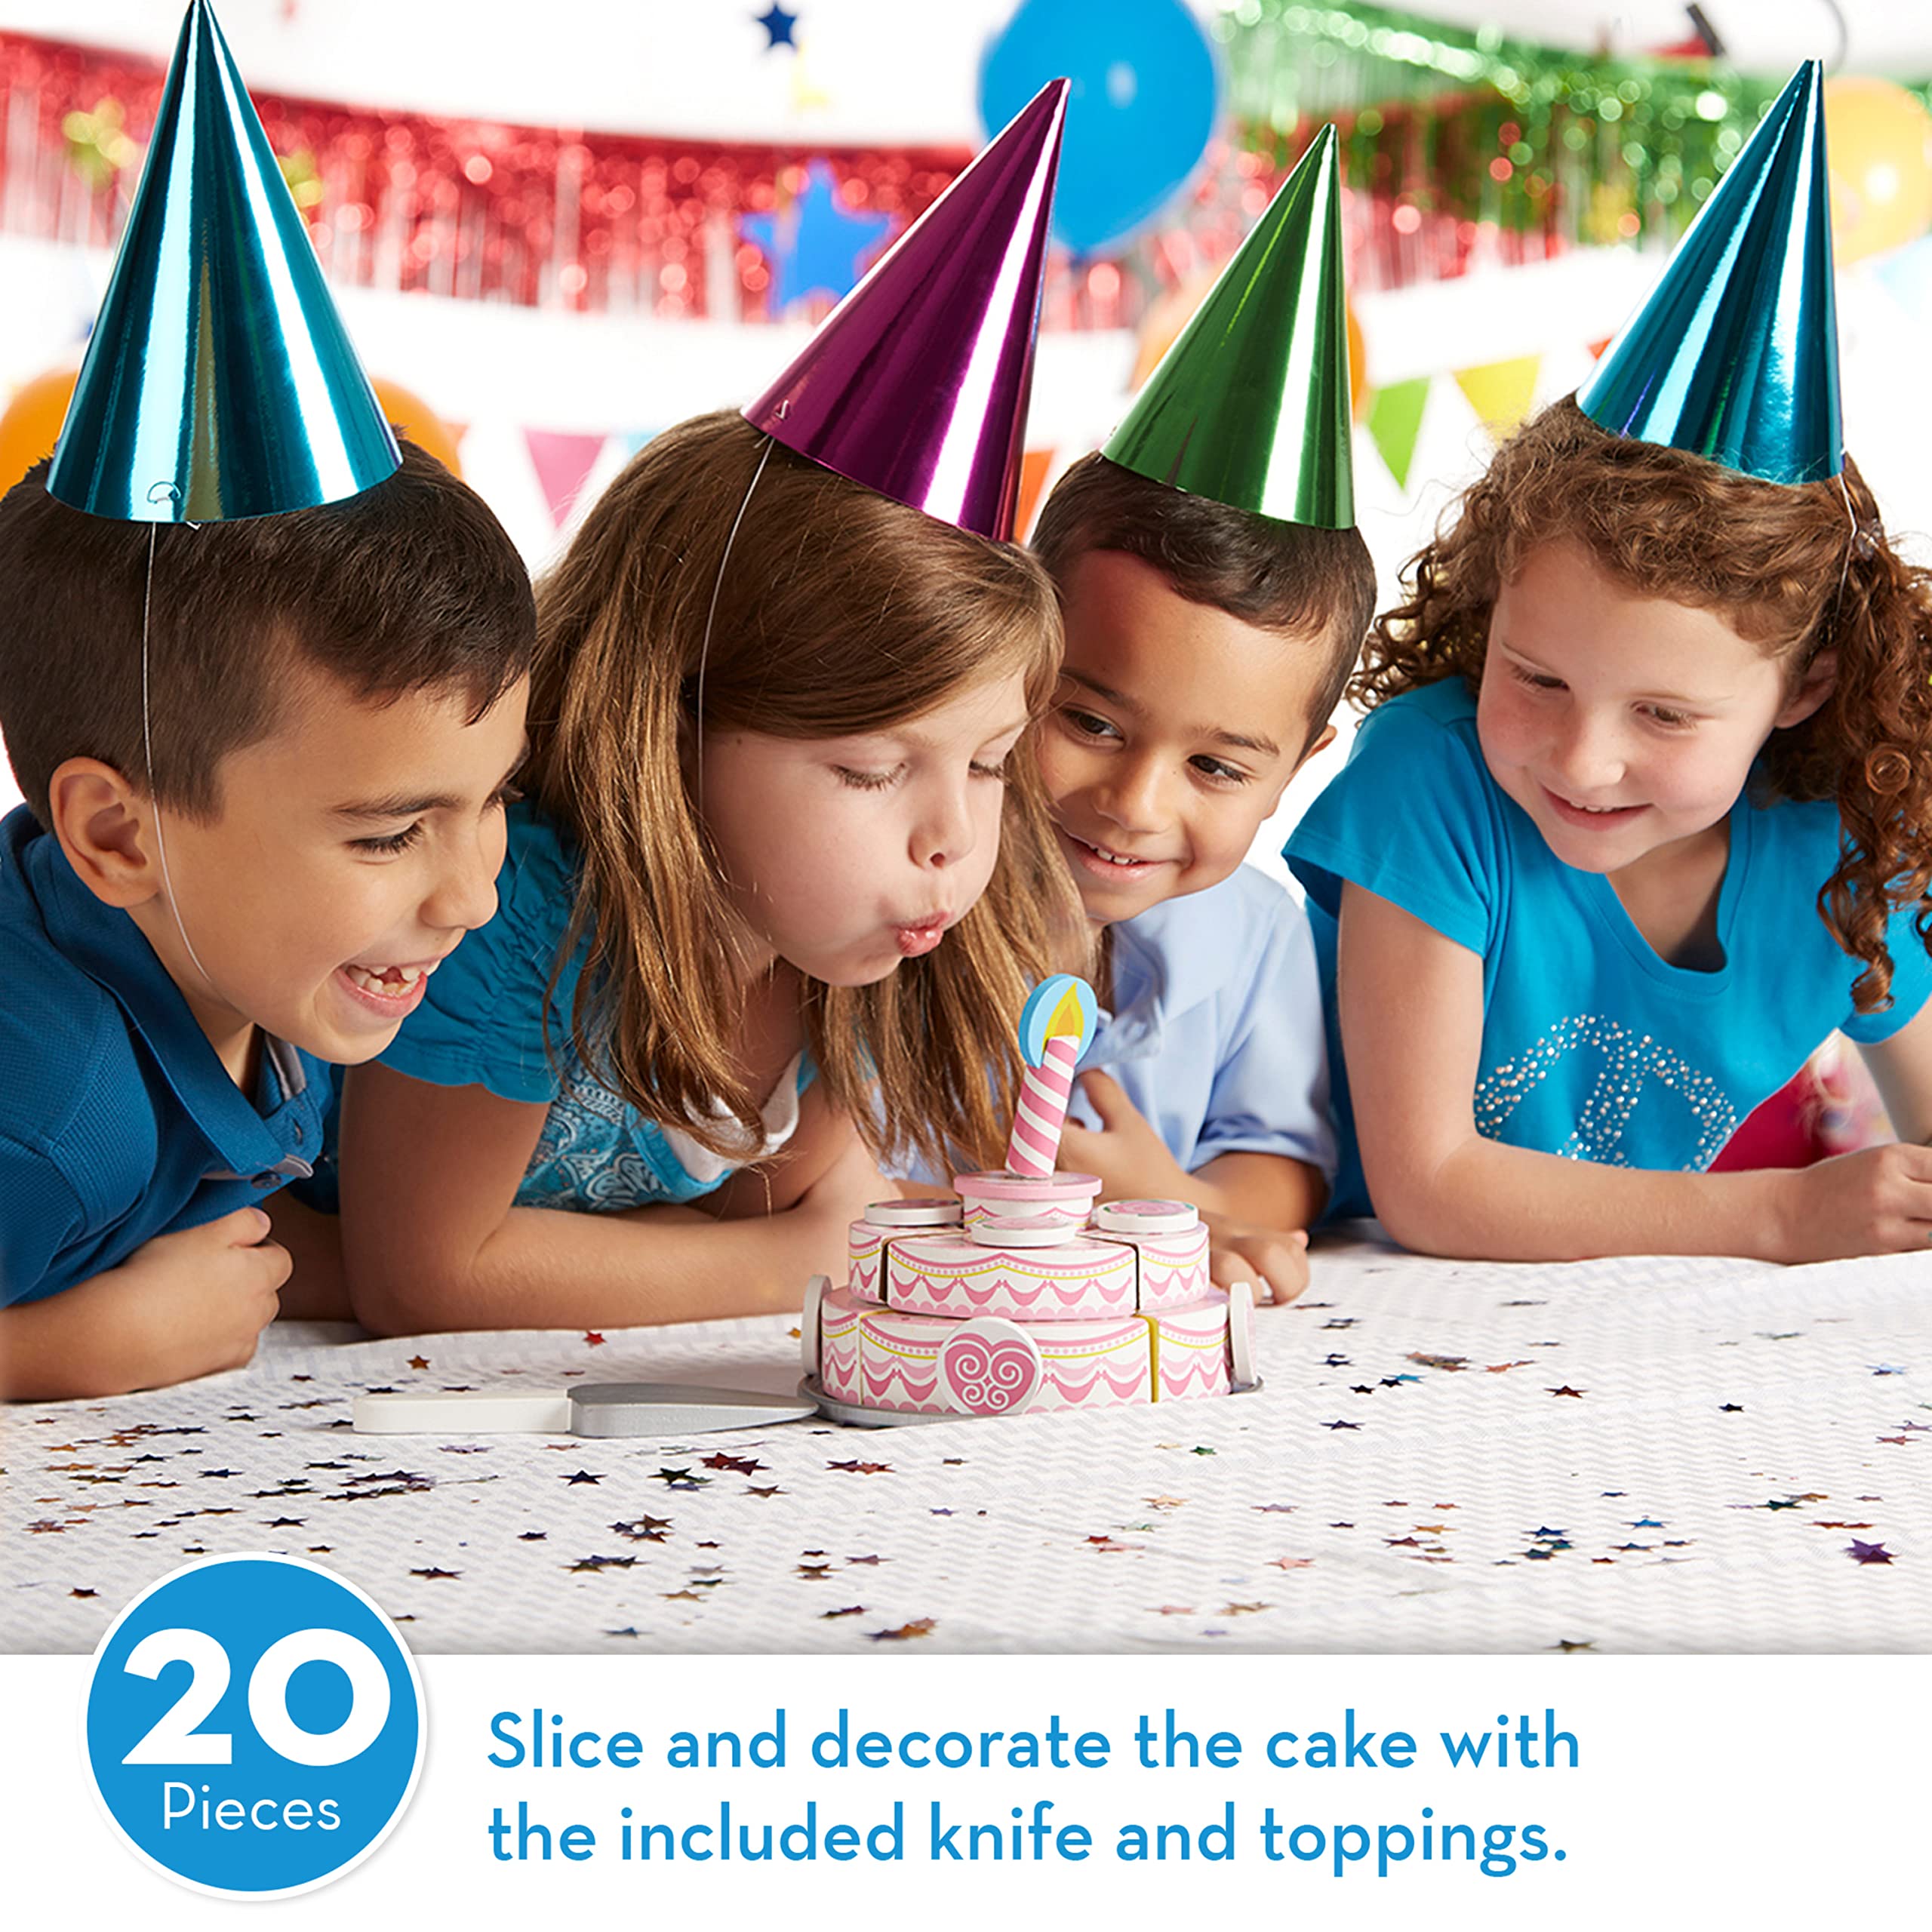 Melissa & Doug Triple-Layer Party Cake Wooden Play Food Set - Birthday Cake Pretend Food Play Set For Toddlers, Kids Ages 3+